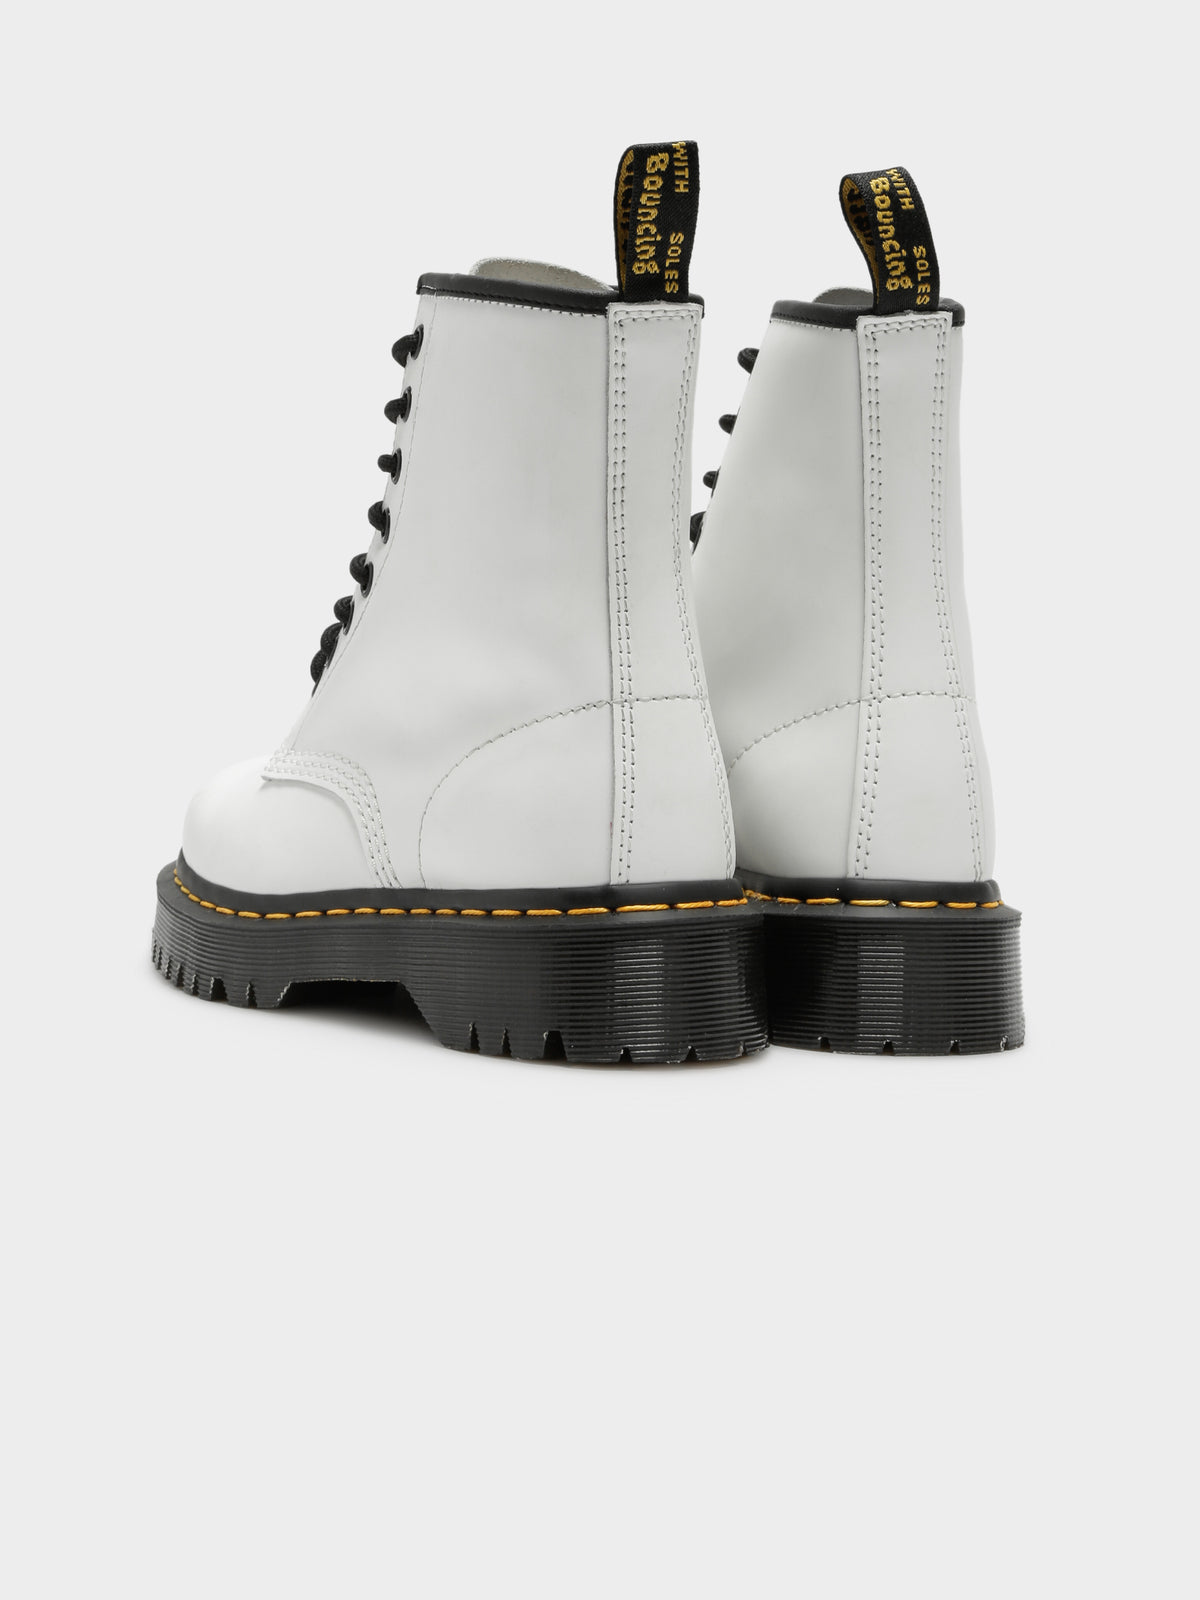 Unisex 1460 Bex Boots in White